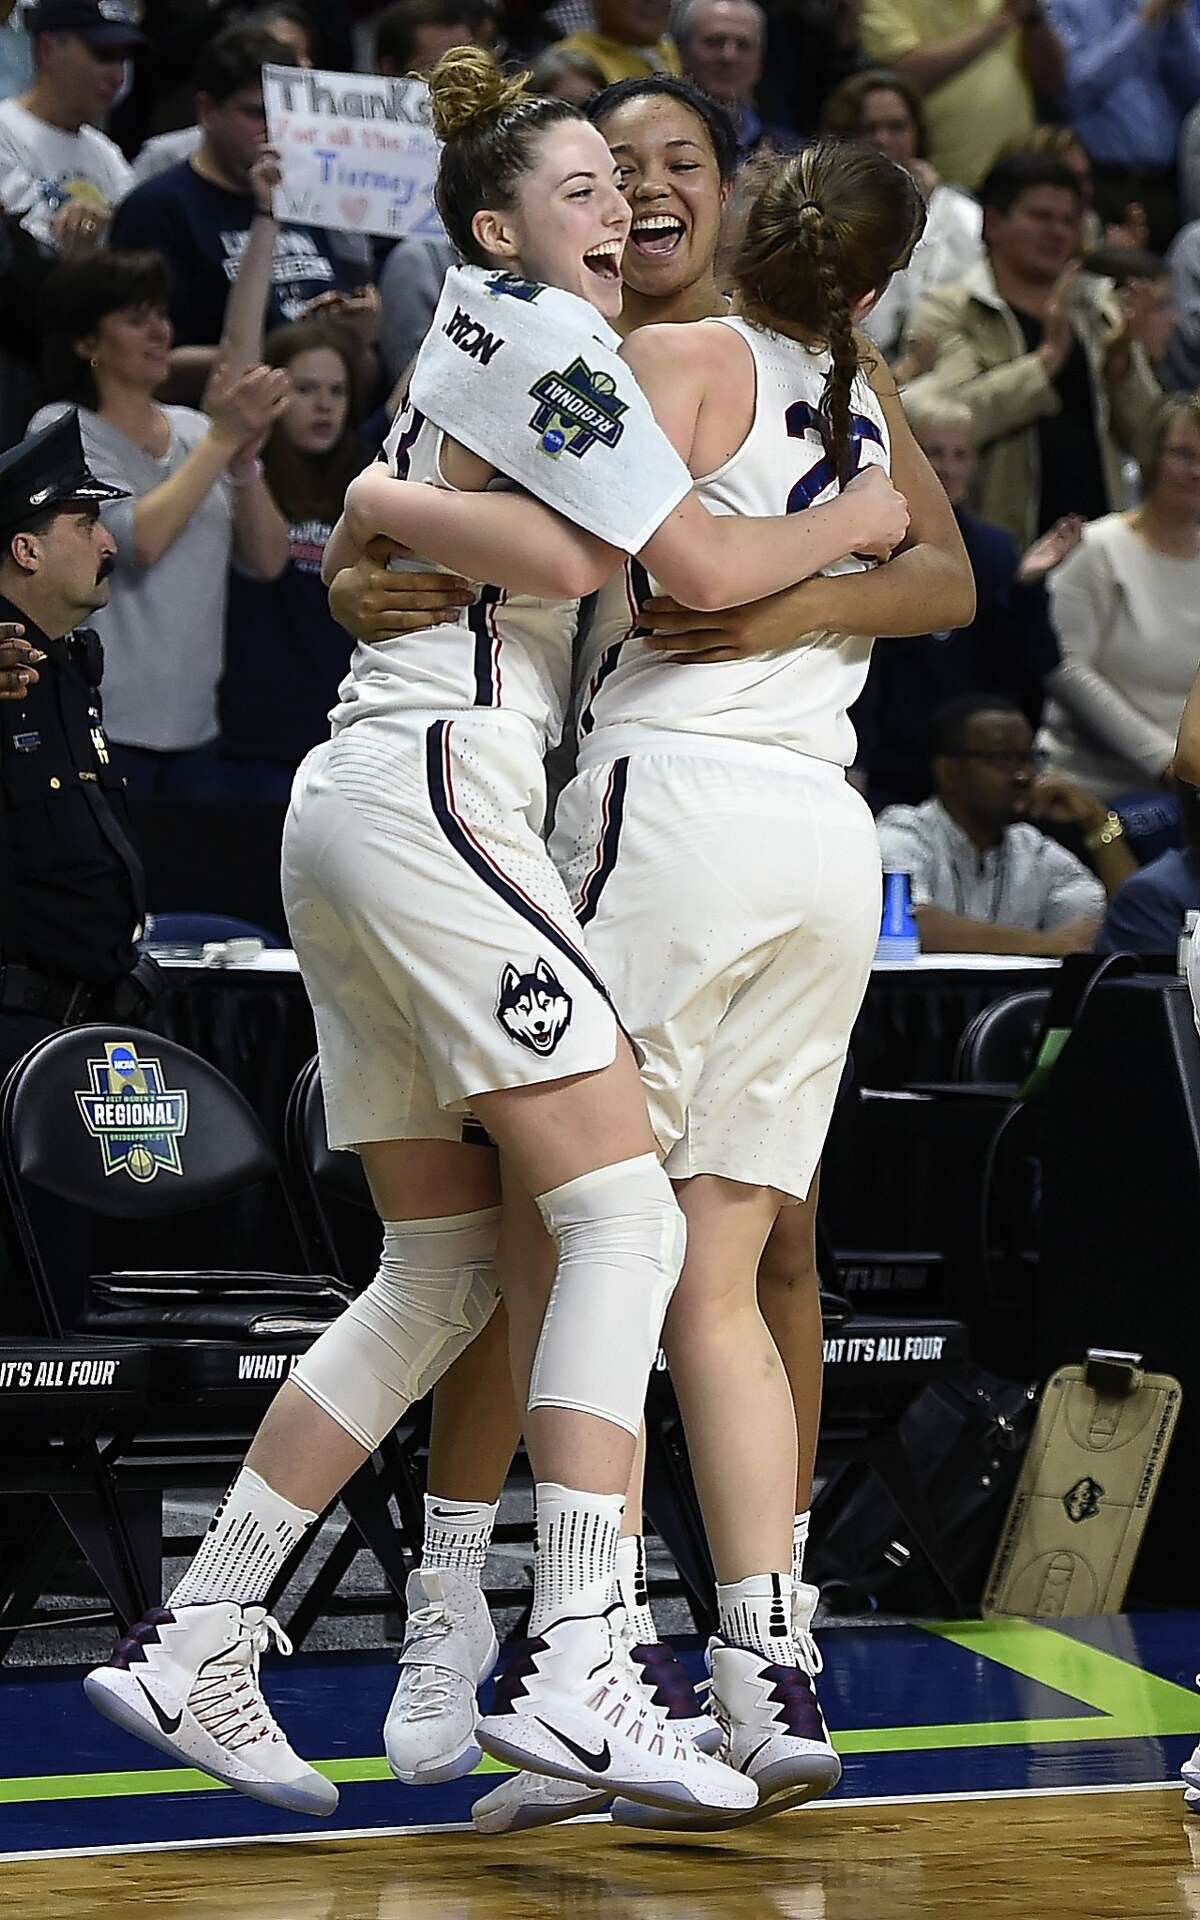 Connecticut's Katie Lou Samuelson, left, Napheesa Collier, center, and Kyla Irwin, right, celebrate as the clock winds down on their 90-52 win over Oregon in a regional final game in the NCAA women's college basketball tournament, Monday, March 27, 2017, in Bridgeport, Conn. (AP Photo/Jessica Hill)